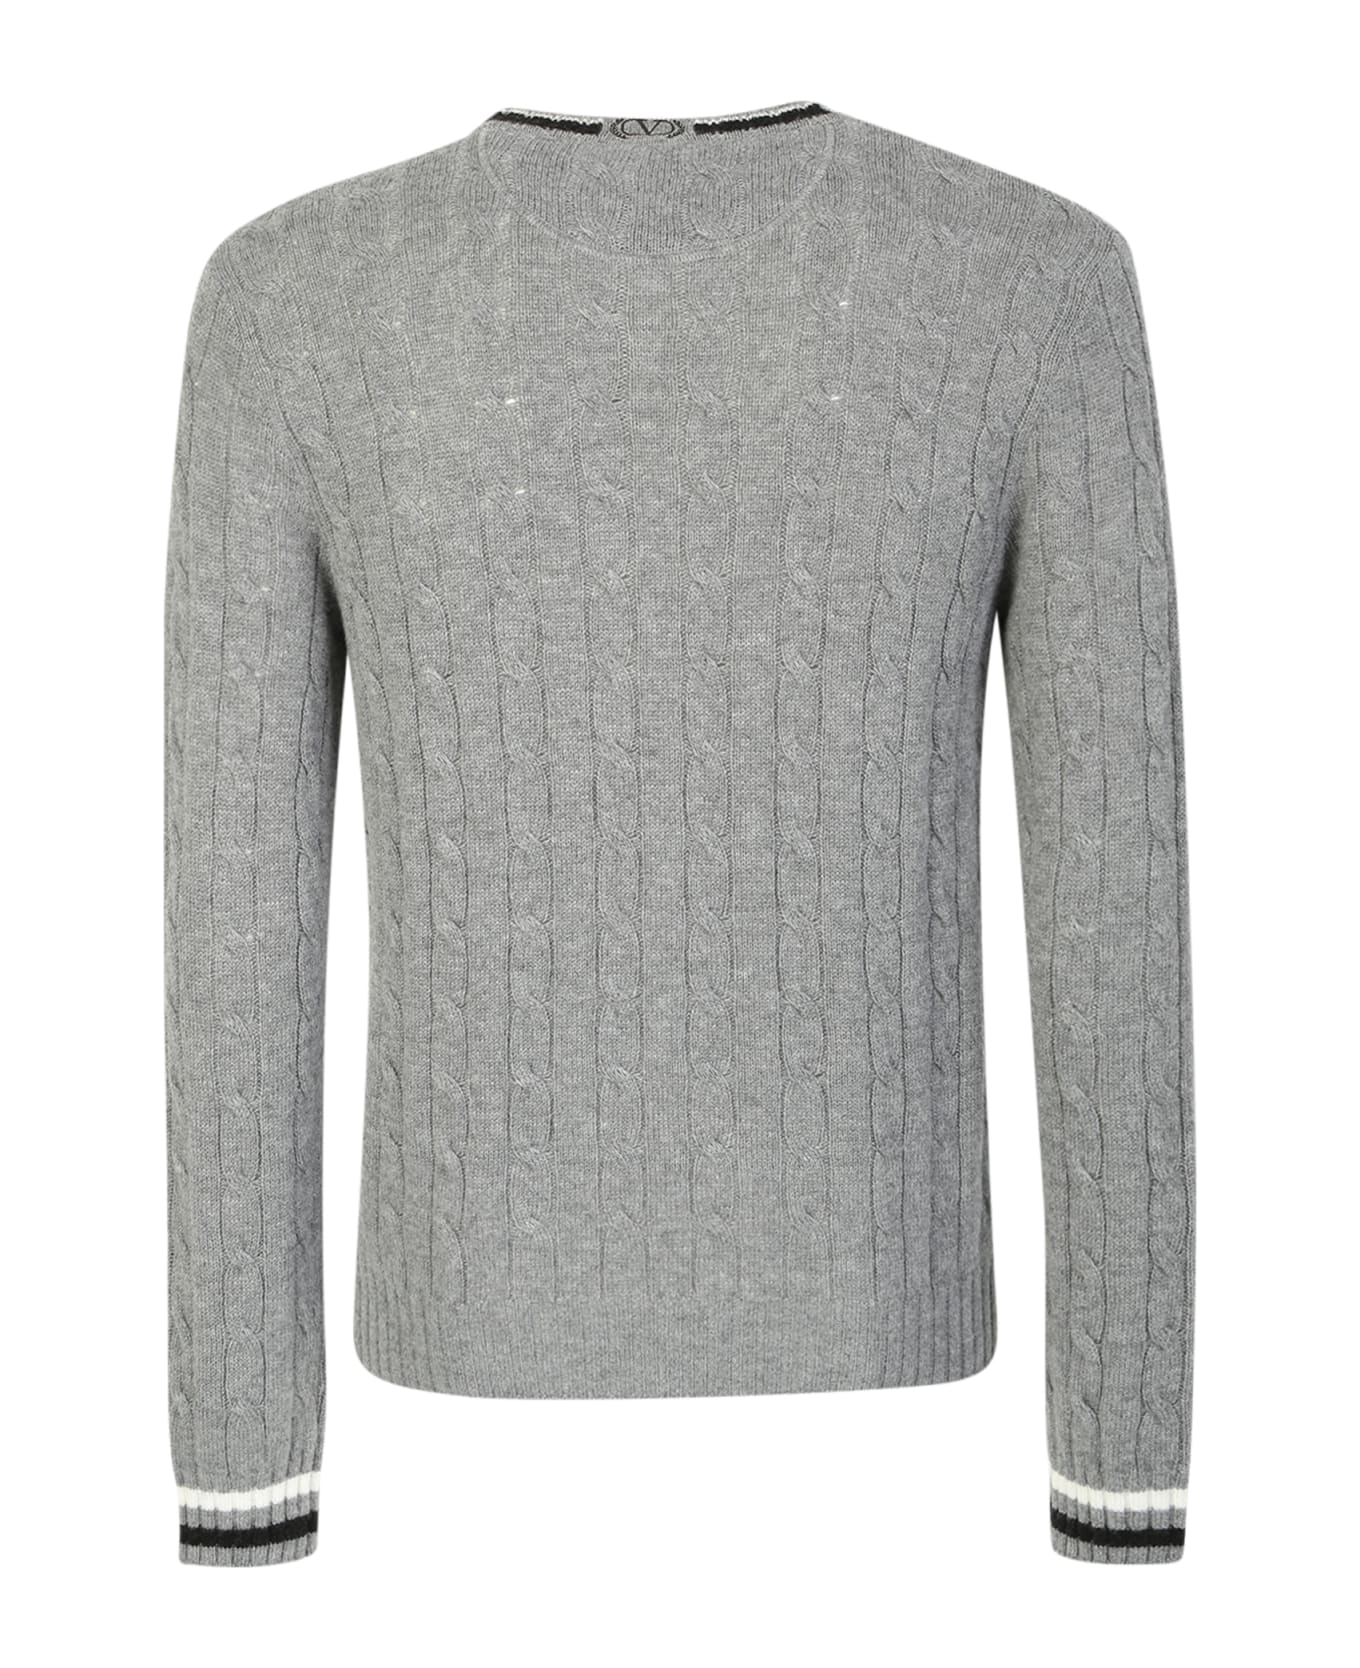 Valentino Cable Sweater Made Of Soft Virgin Wool - Grey ニットウェア